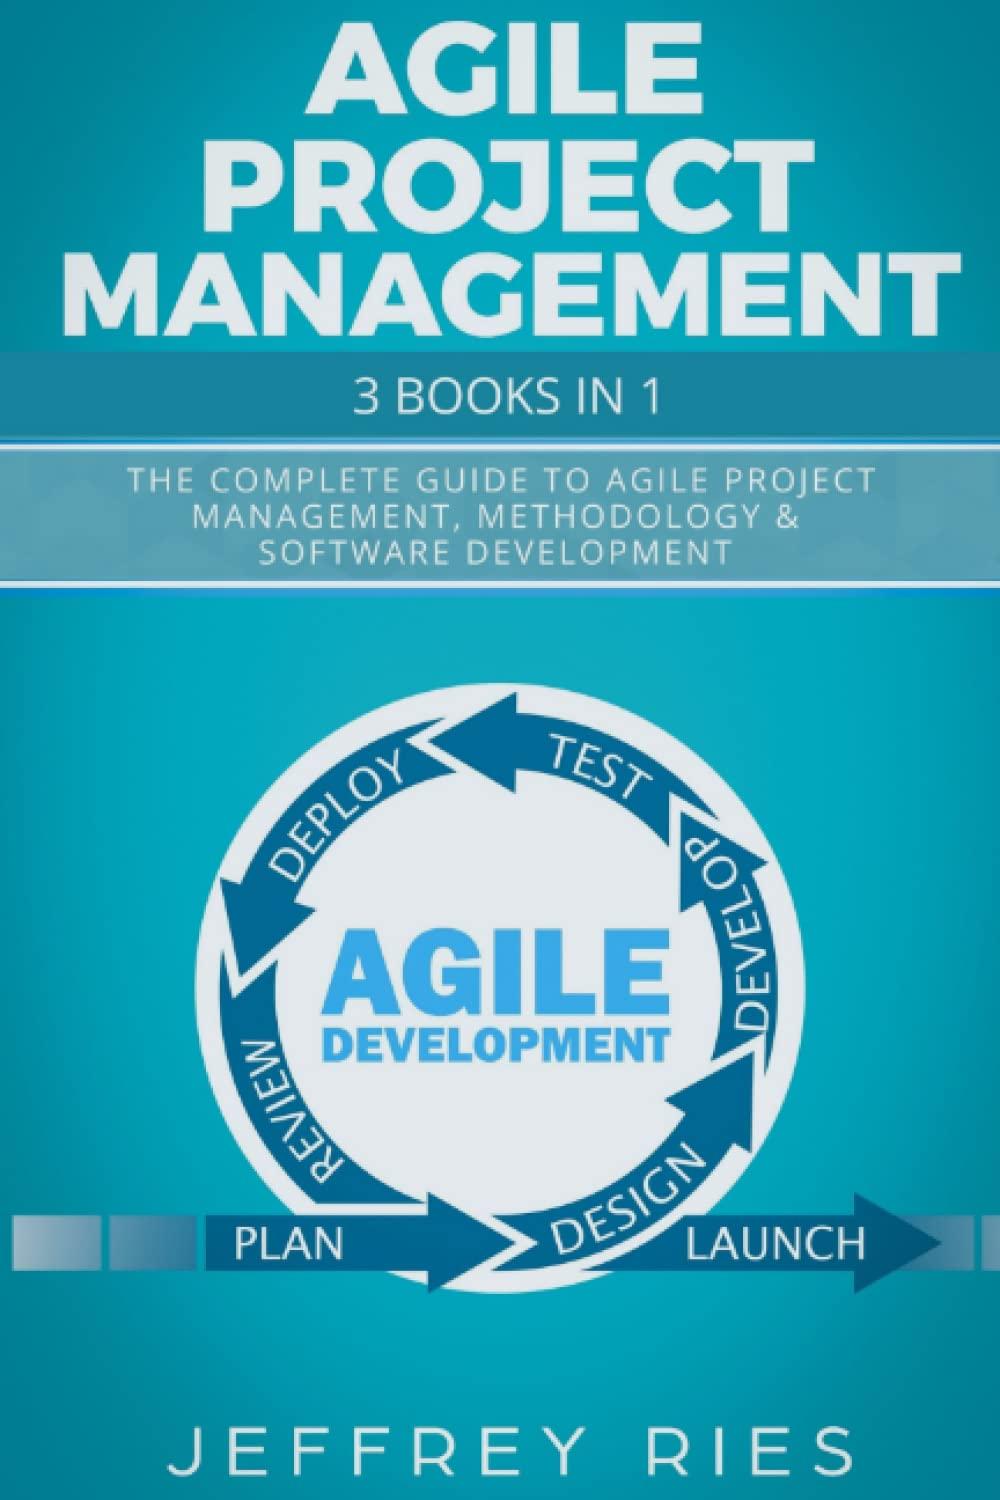 agile project management 3 books in 1 the complete guide to agile project management methodology and software